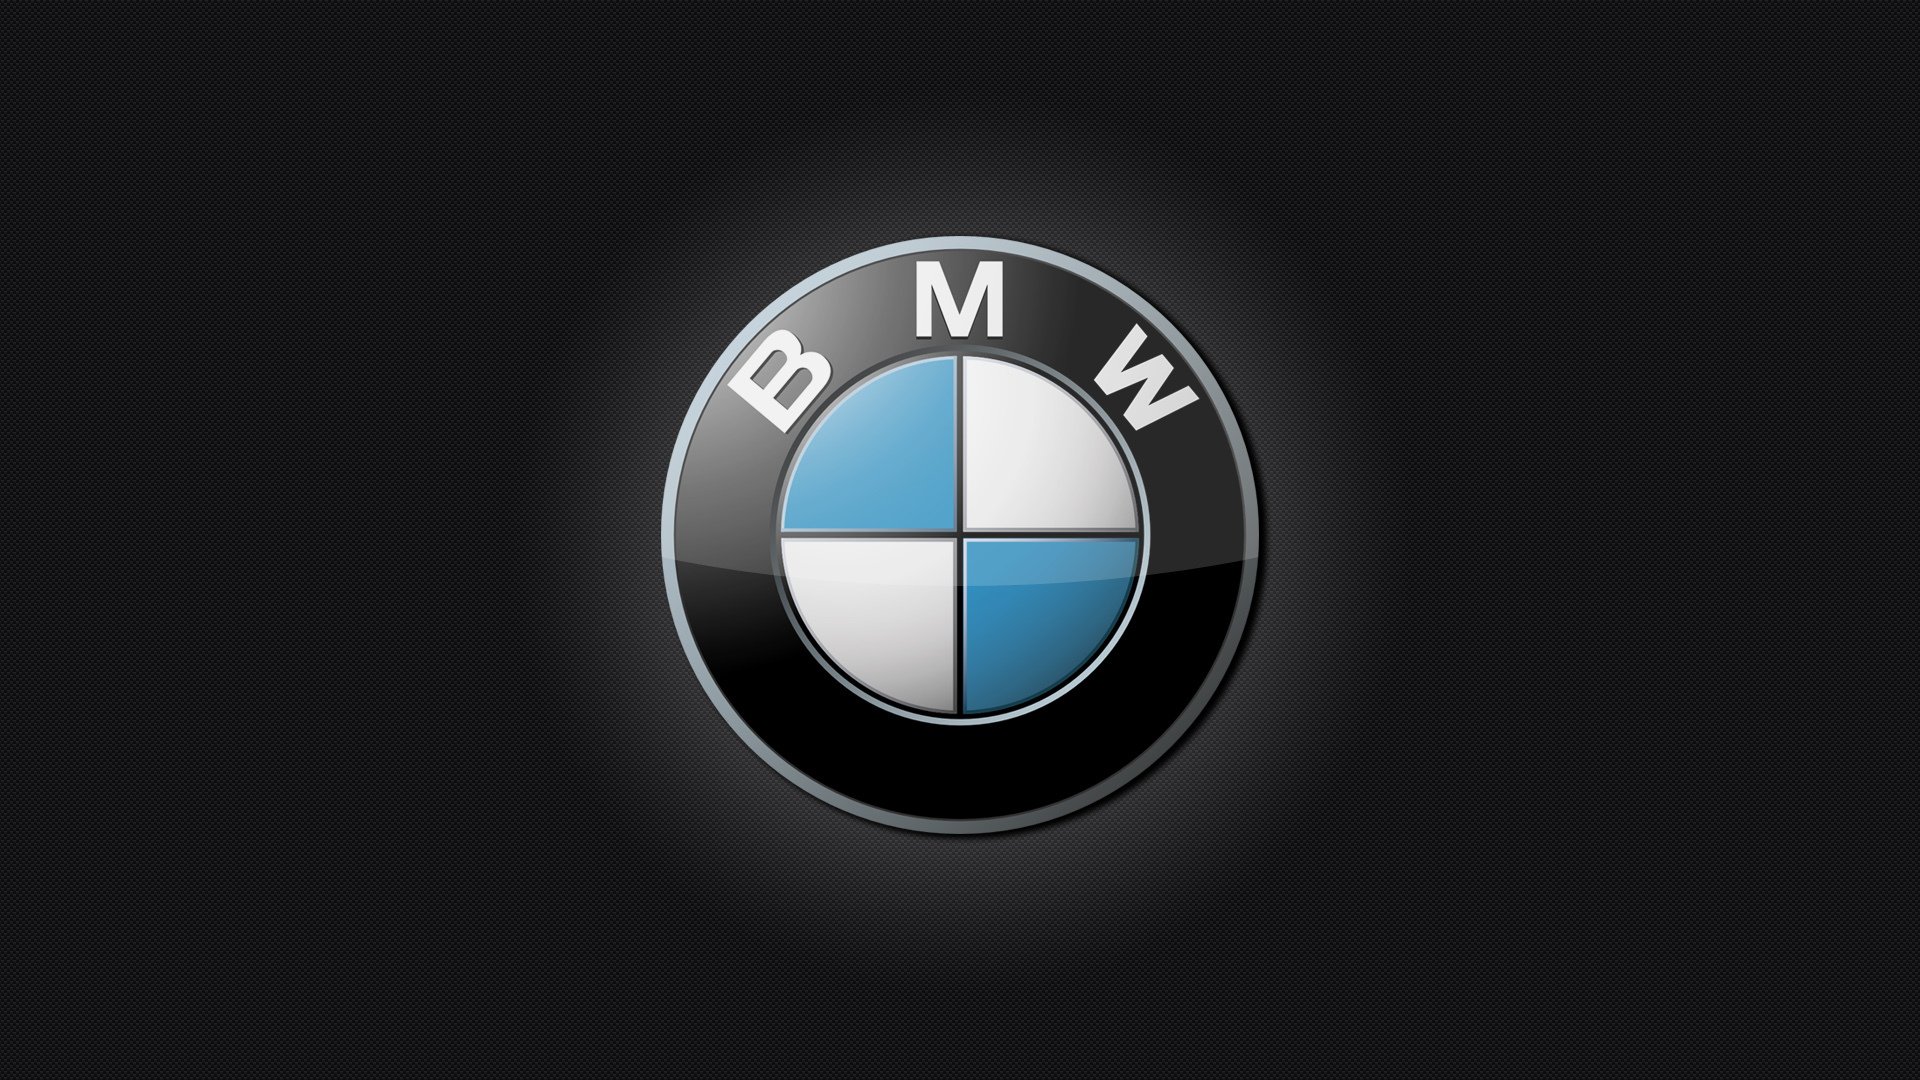 Bmw Logo Wallpaper Pictures Image For